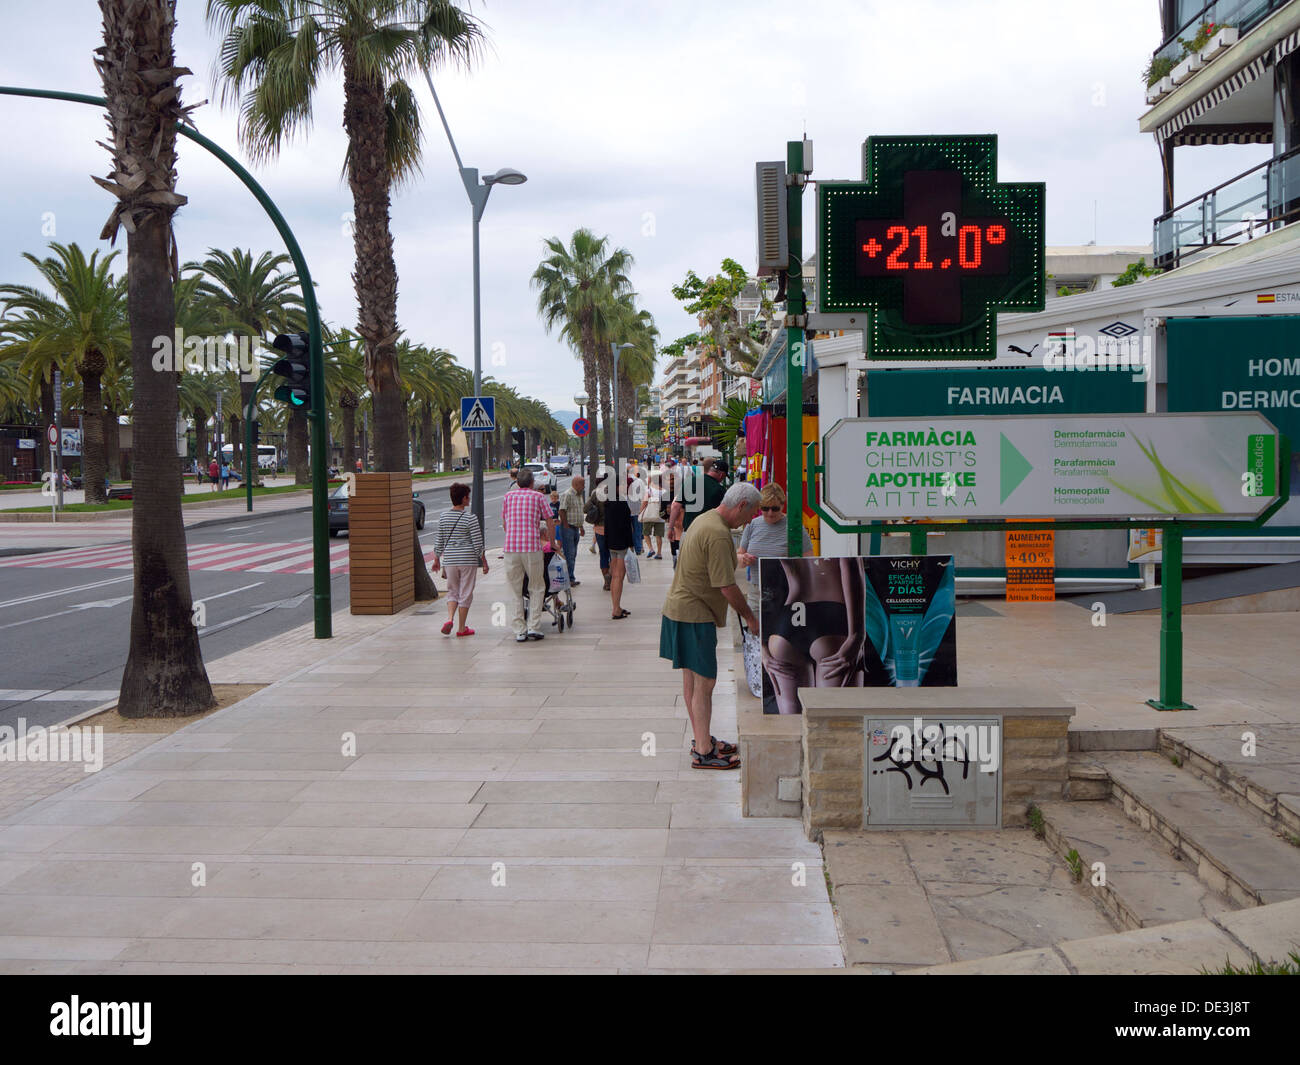 Temperature display on the side walk in Spain (+21.0) Stock Photo